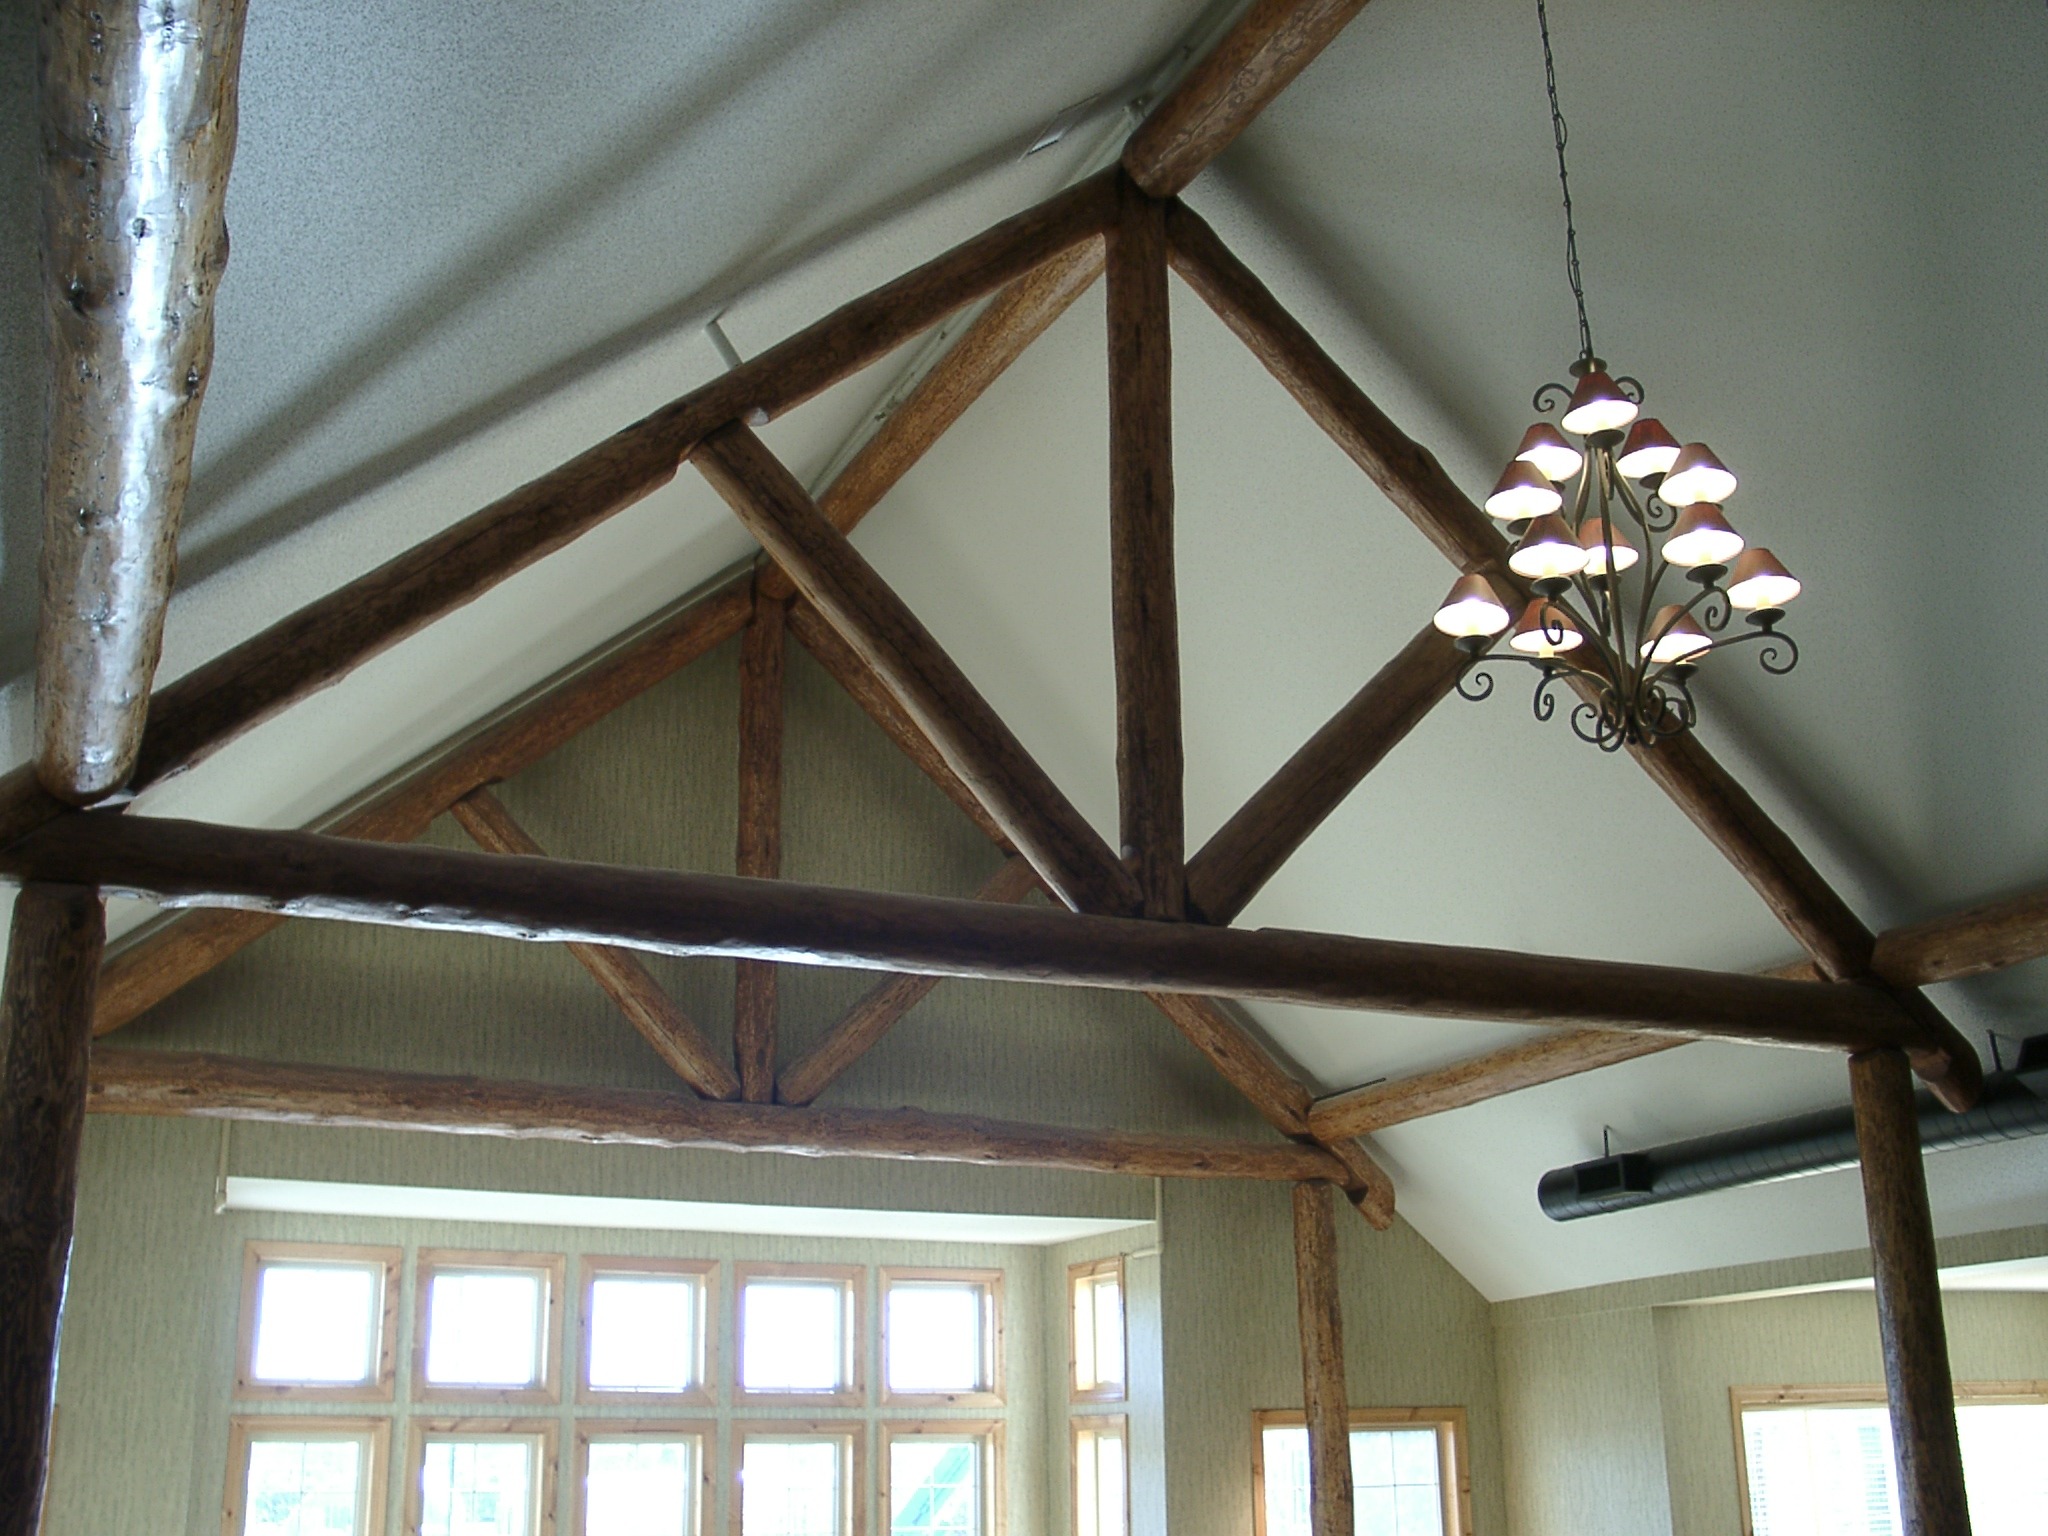 Wood log beams and arch support